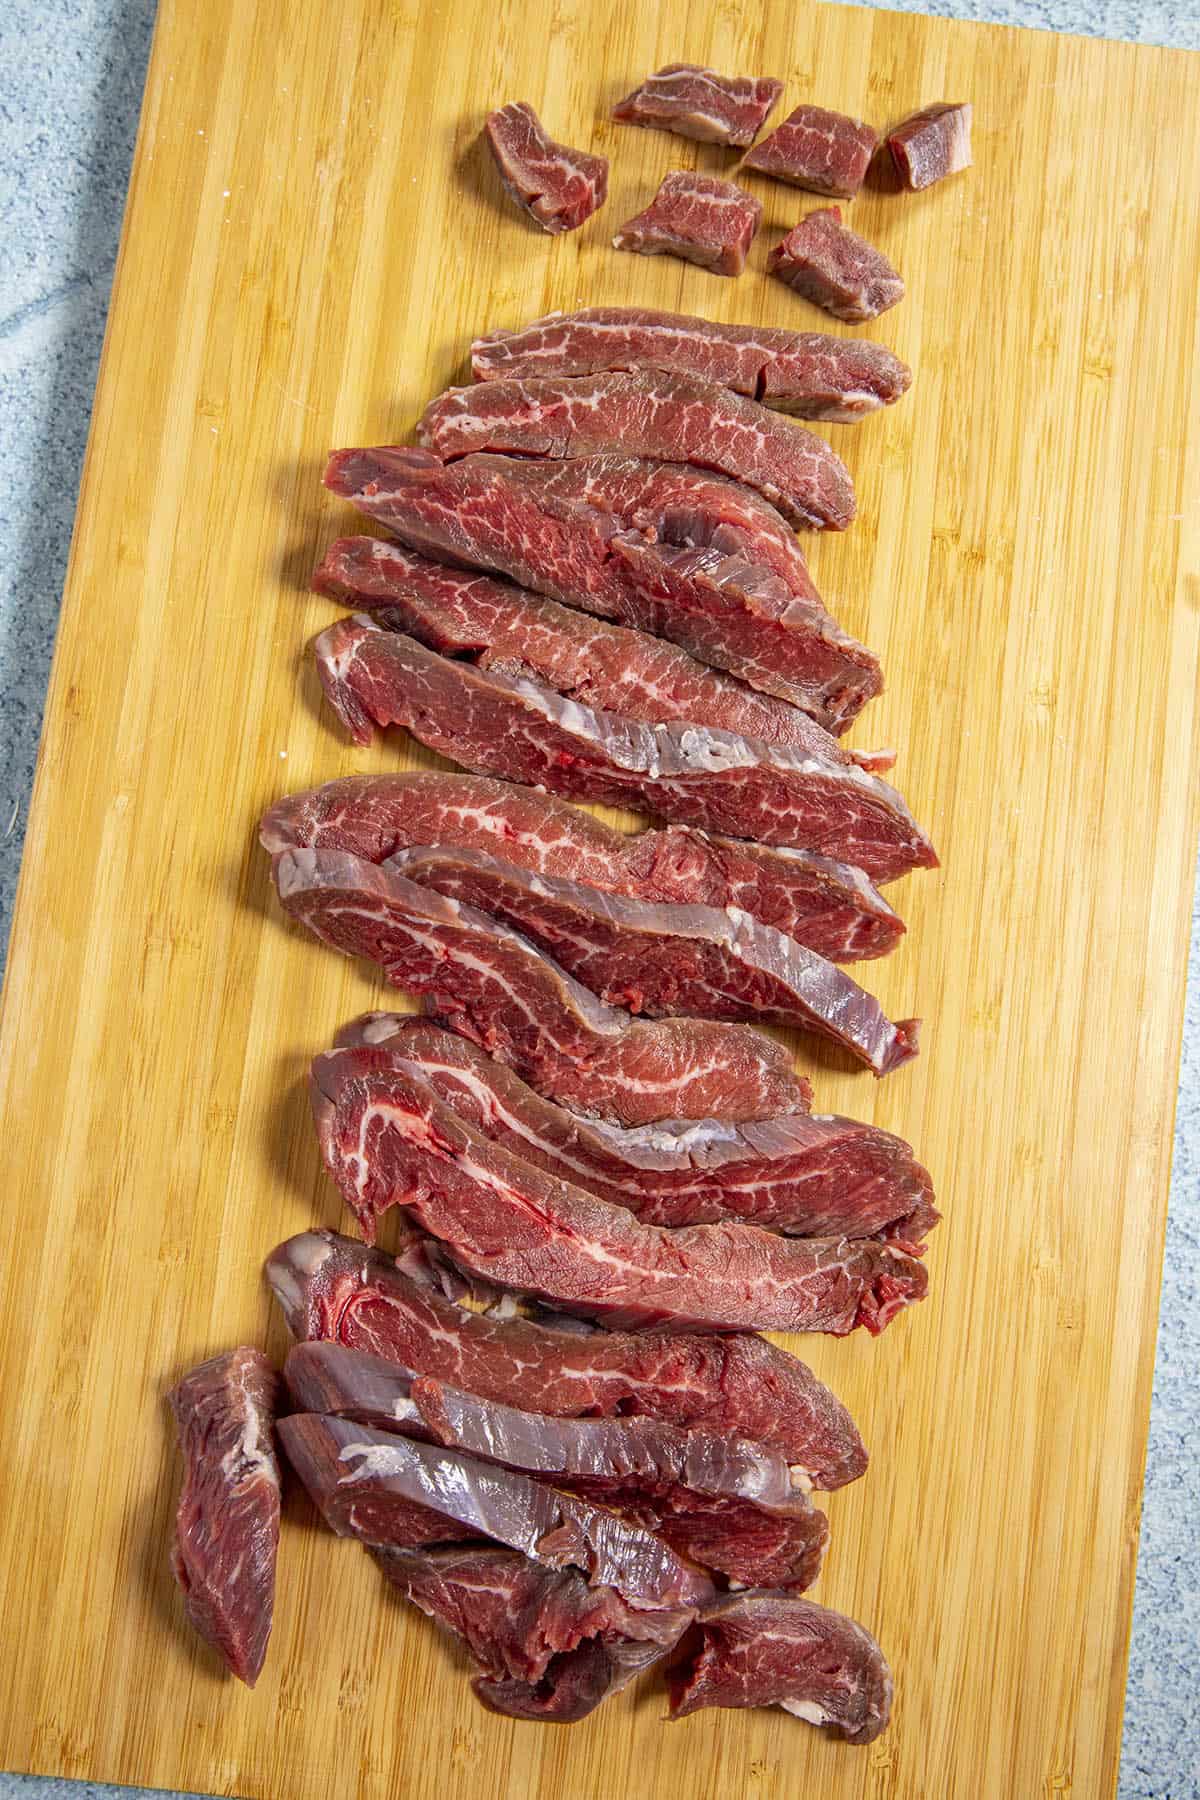 Slicing the beef on a cutting board